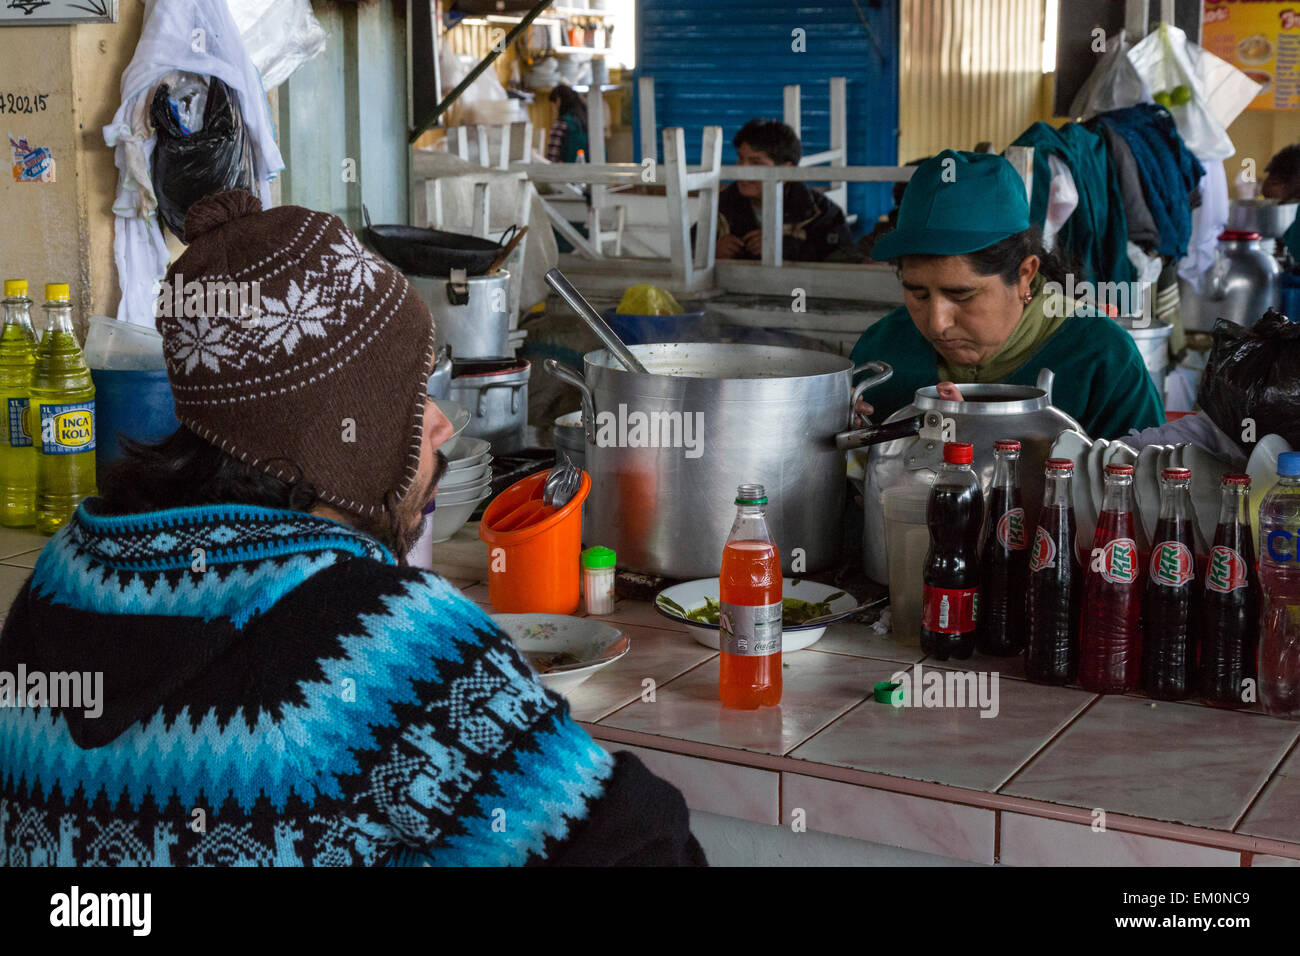 Peru, Cusco, San Pedro Market.  Customer Eating in the Food Court Area of the Market. Stock Photo